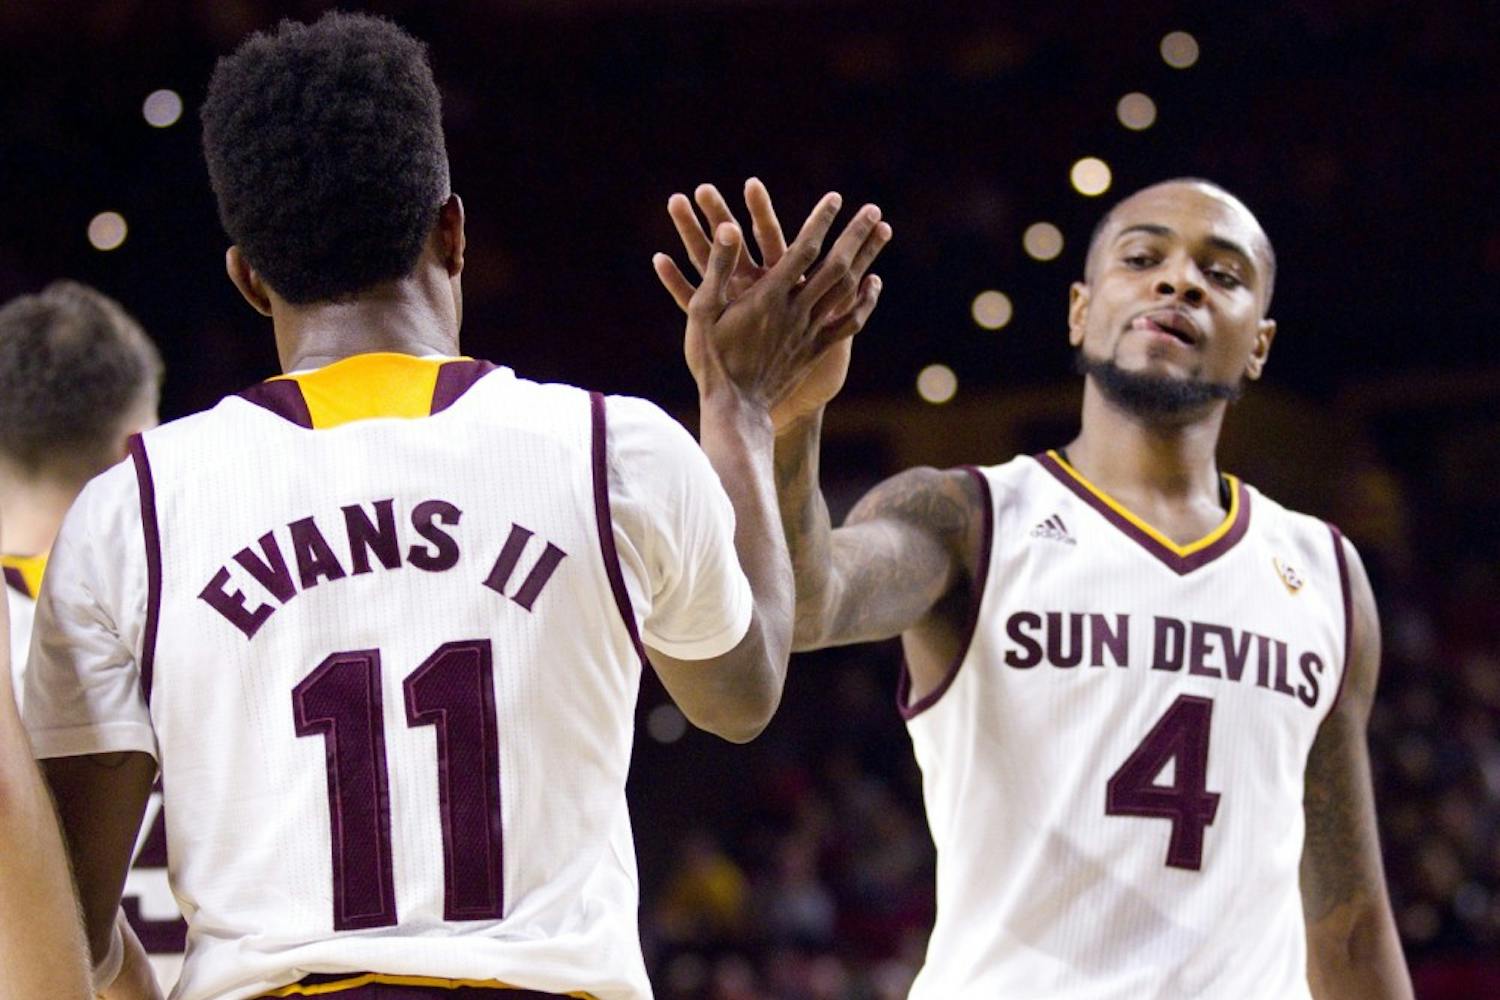 ASU junior guard Shannon Evans II (11) high-fives senior guard Torian Graham (4) after a play in the first half of a men's basketball game against the UNLV Runnin' Rebels in Wells Fargo Arena in Tempe, Arizona, on Saturday, Dec. 3, 2016. ASU won 97-73, putting them at 5-3 on the season.